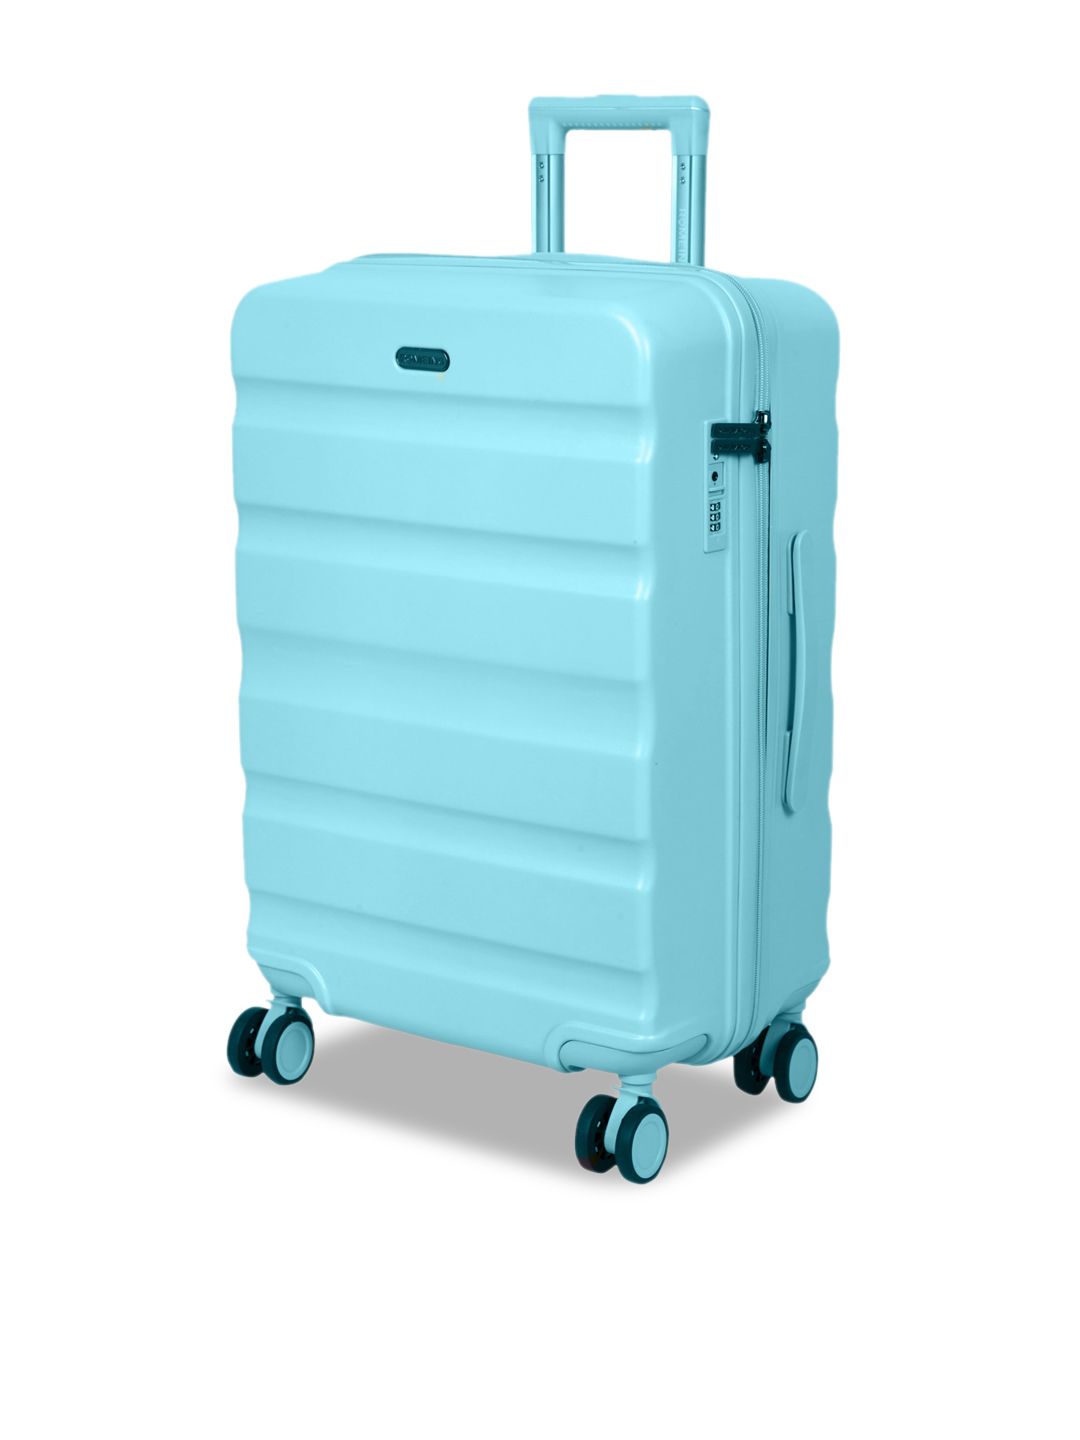 ROMEING Venice Blue Textured Hard-Sided Polycarbonate Medium Trolley Suitcase Price in India